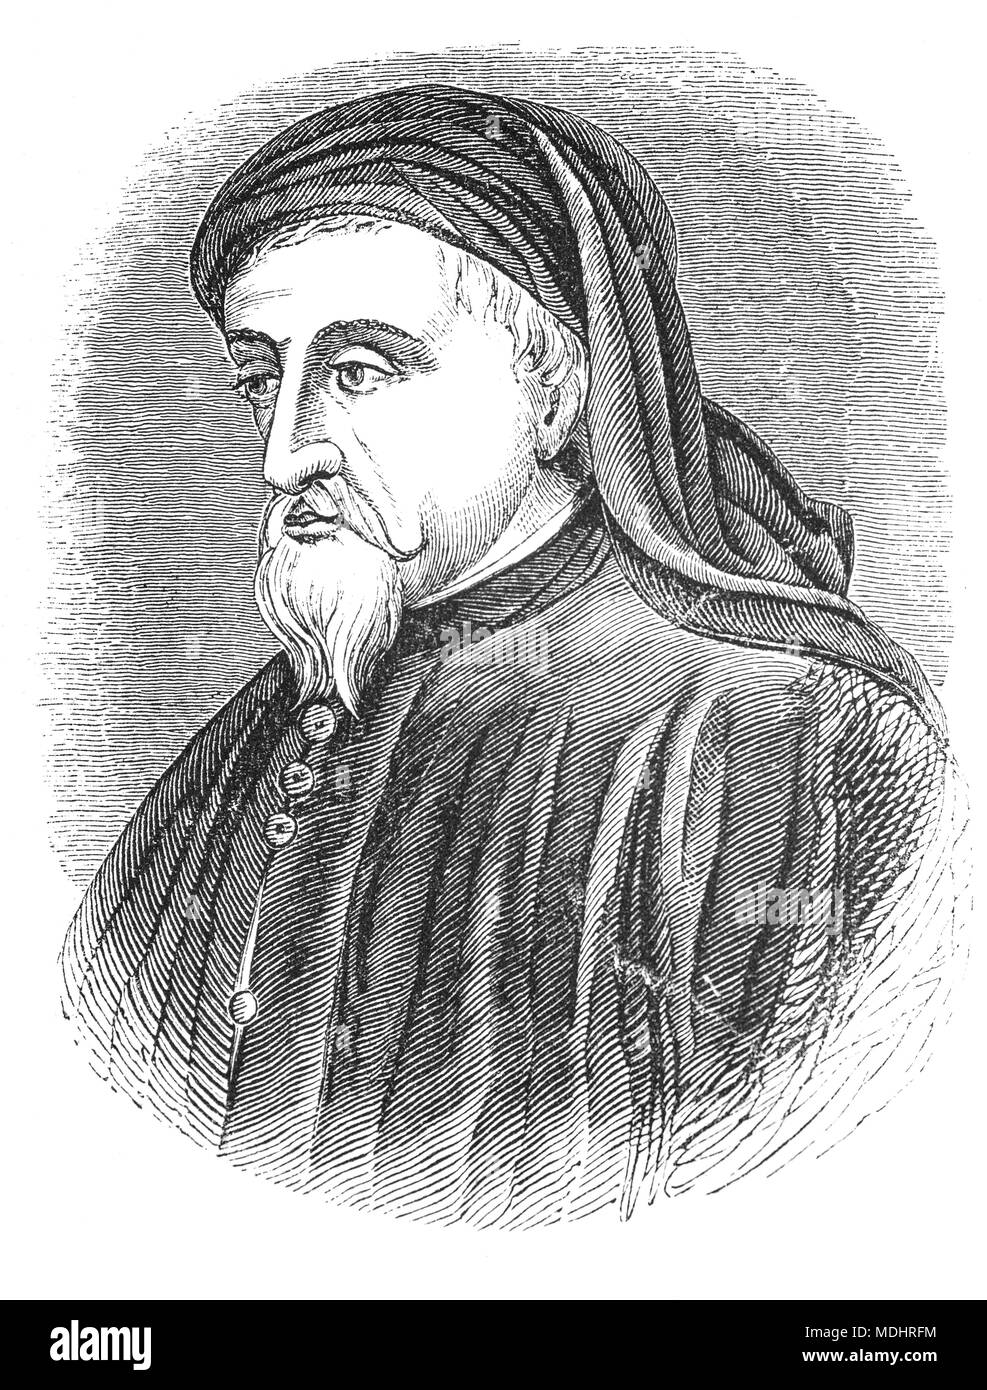 A portrait of Geoffrey Chaucer (1343 – 1400), known as the Father of English literature, is widely considered to be the greatest English poet of the Middle Ages. Among his many works are The Book of the Duchess, The House of Fame, The Legend of Good Women and Troilus and Criseyde, but he is best known for The Canterbury Tales. His work was crucial in legitimizing the literary use of the Middle English vernacular at a time when the dominant literary languages in England were French and Latin.  The first poet to be buried in Poets' Corner of Westminster Abbey, he also achieved fame as an author, Stock Photo